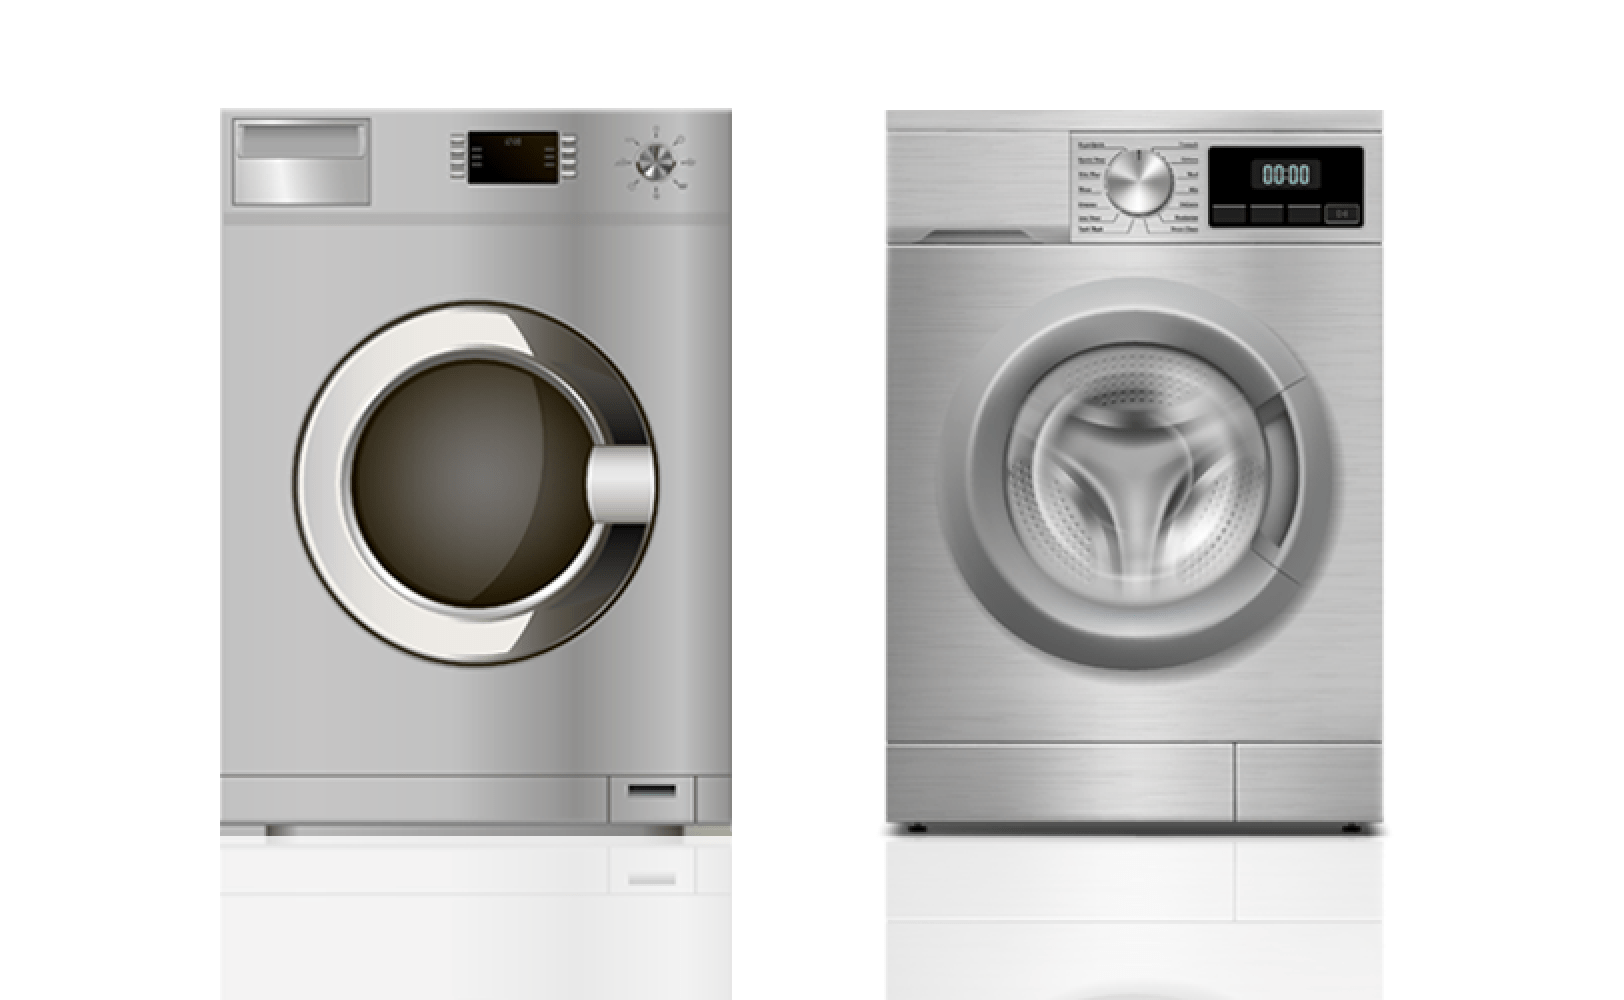 Washer Repair Service in Freeport